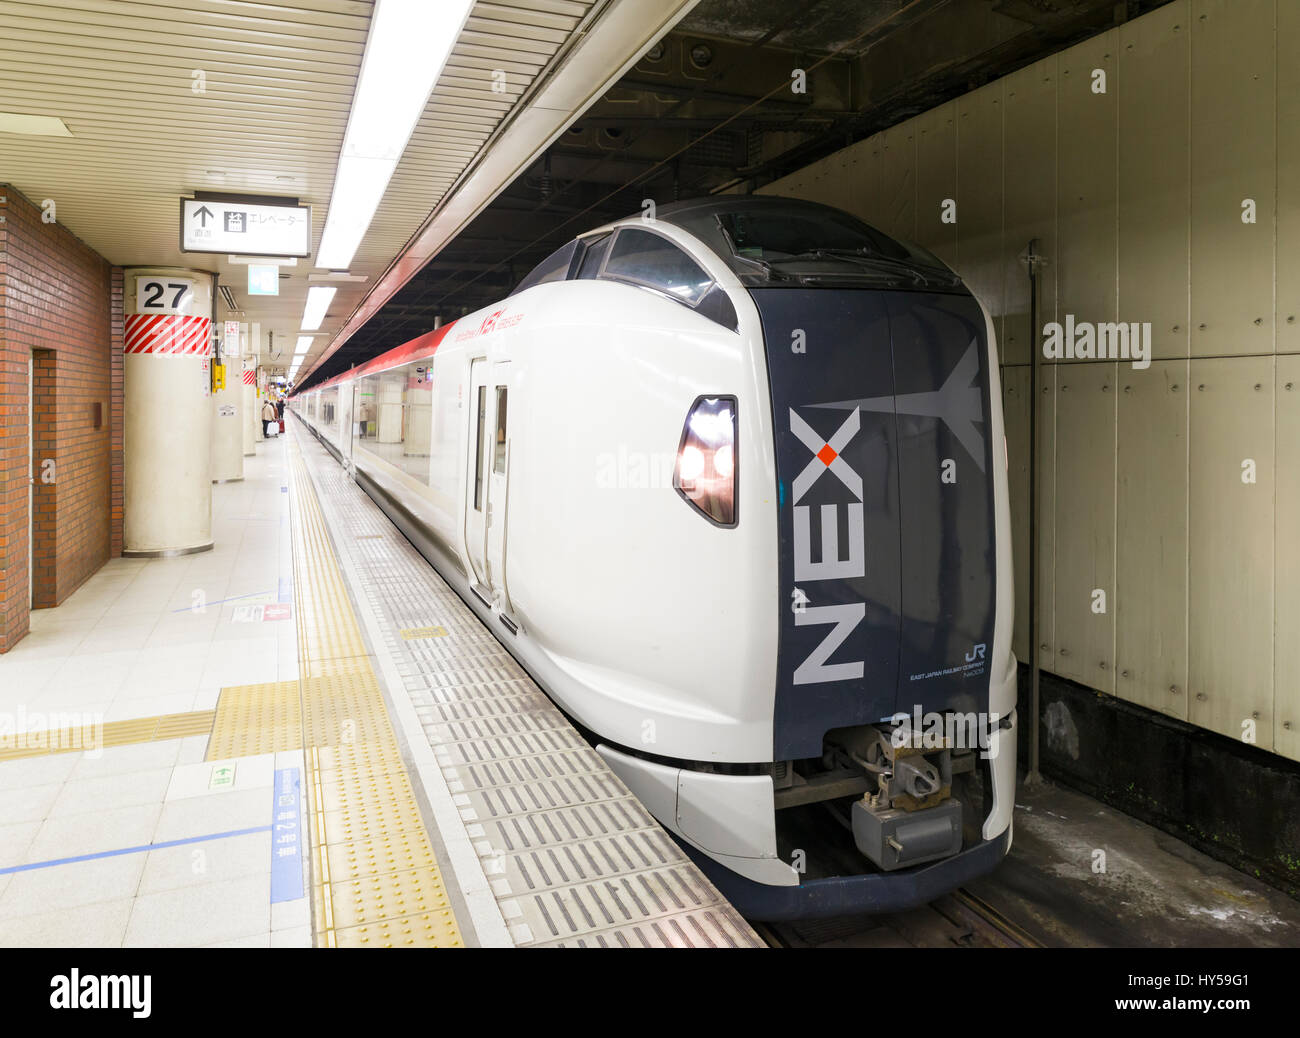 The Narita Express (N'Ex), a premium express train service operated by JR East, arrives at an underground platform of Tokyo Station, Tokyo, Japan Stock Photo